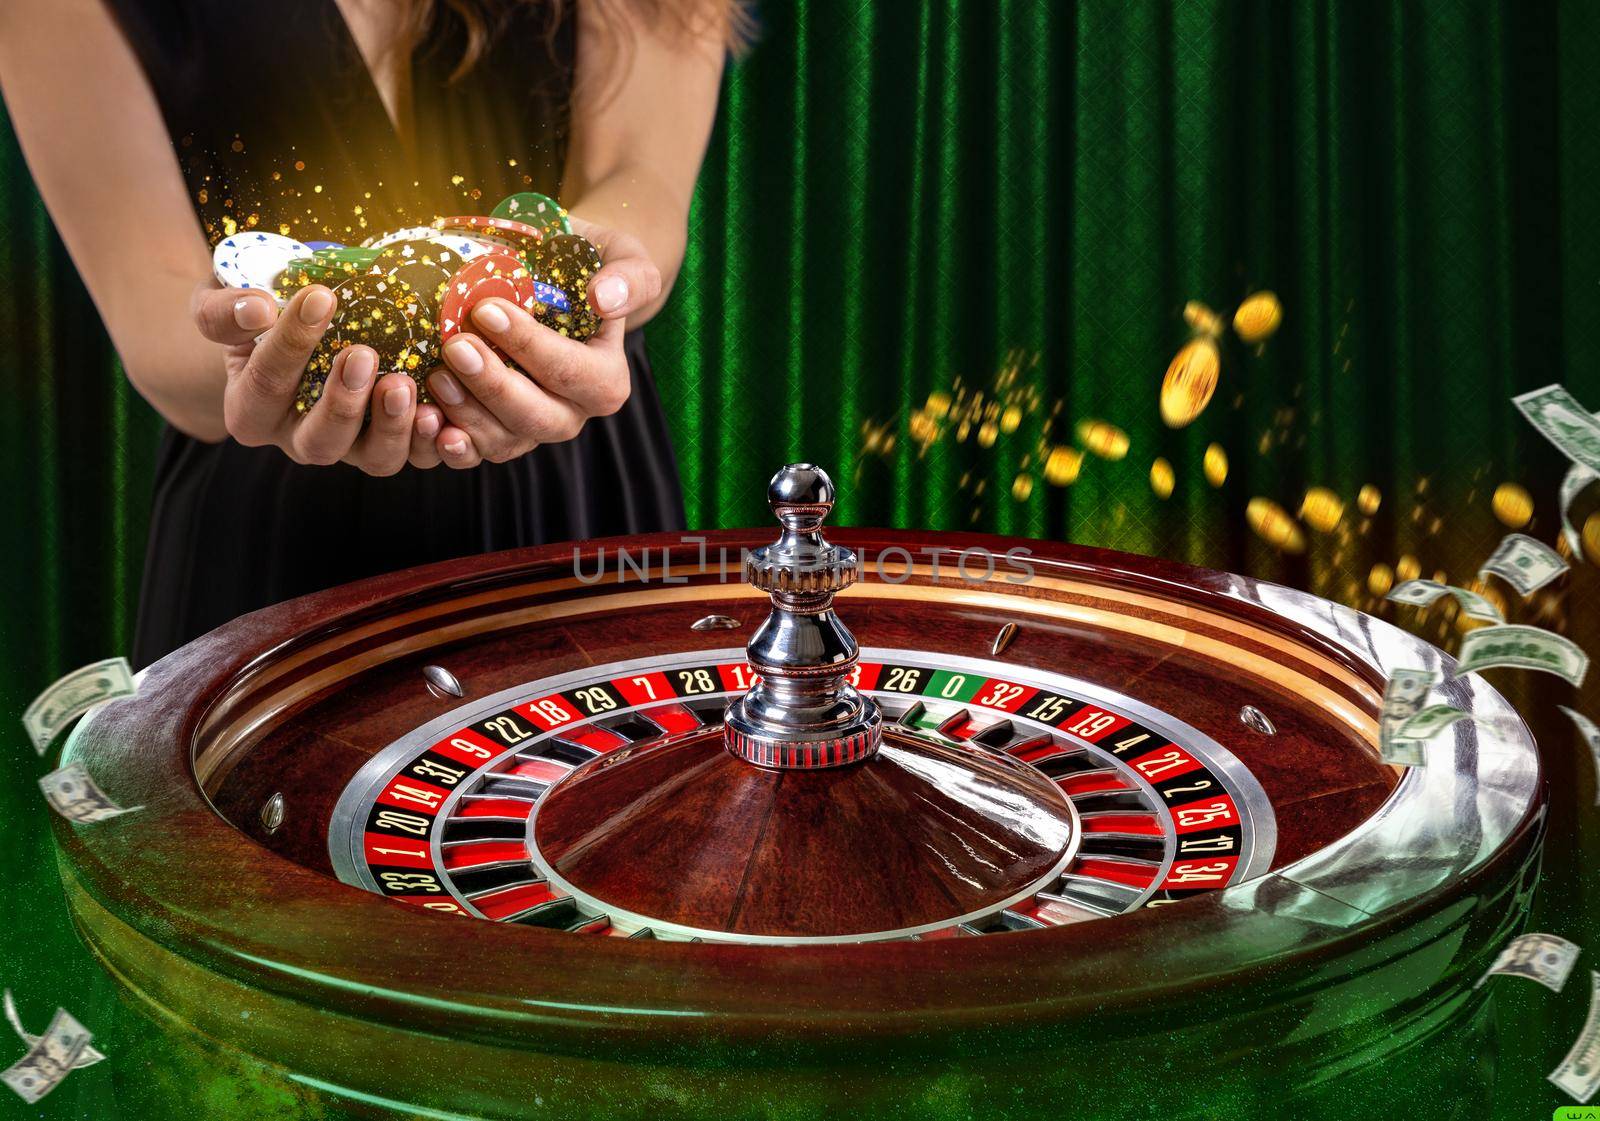 Collage of casino images with a close-up vibrant image of multicolored casino roulette table with poker chips in woman hands. Green background with golden sparks